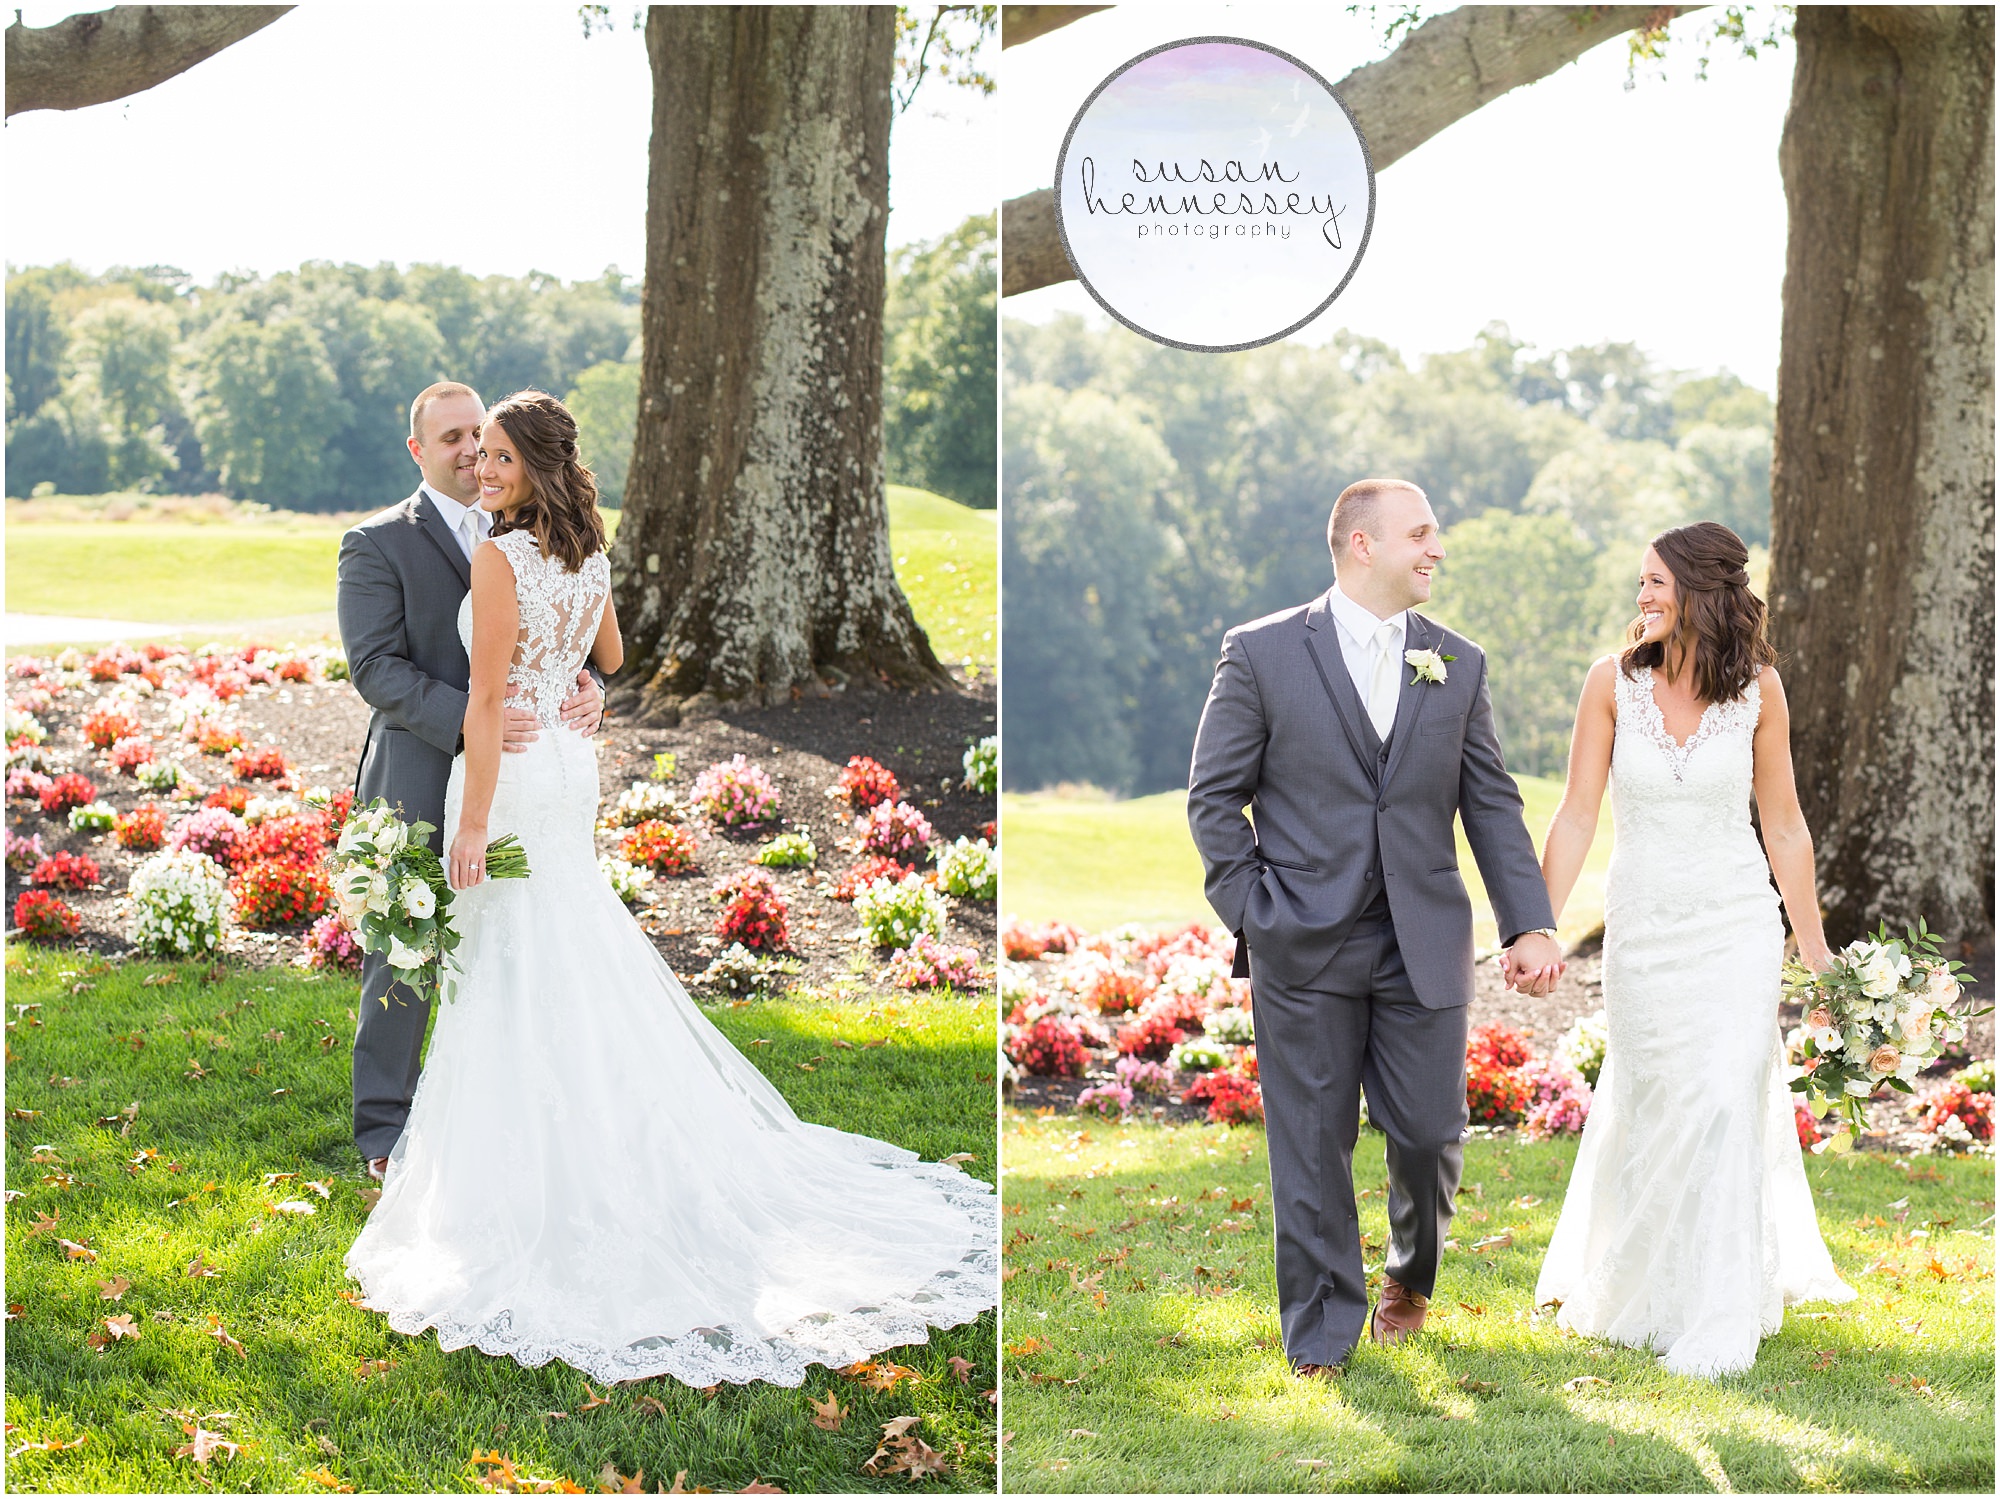 Bride and groom at Old York Country Club in Chesterfield, New Jersey